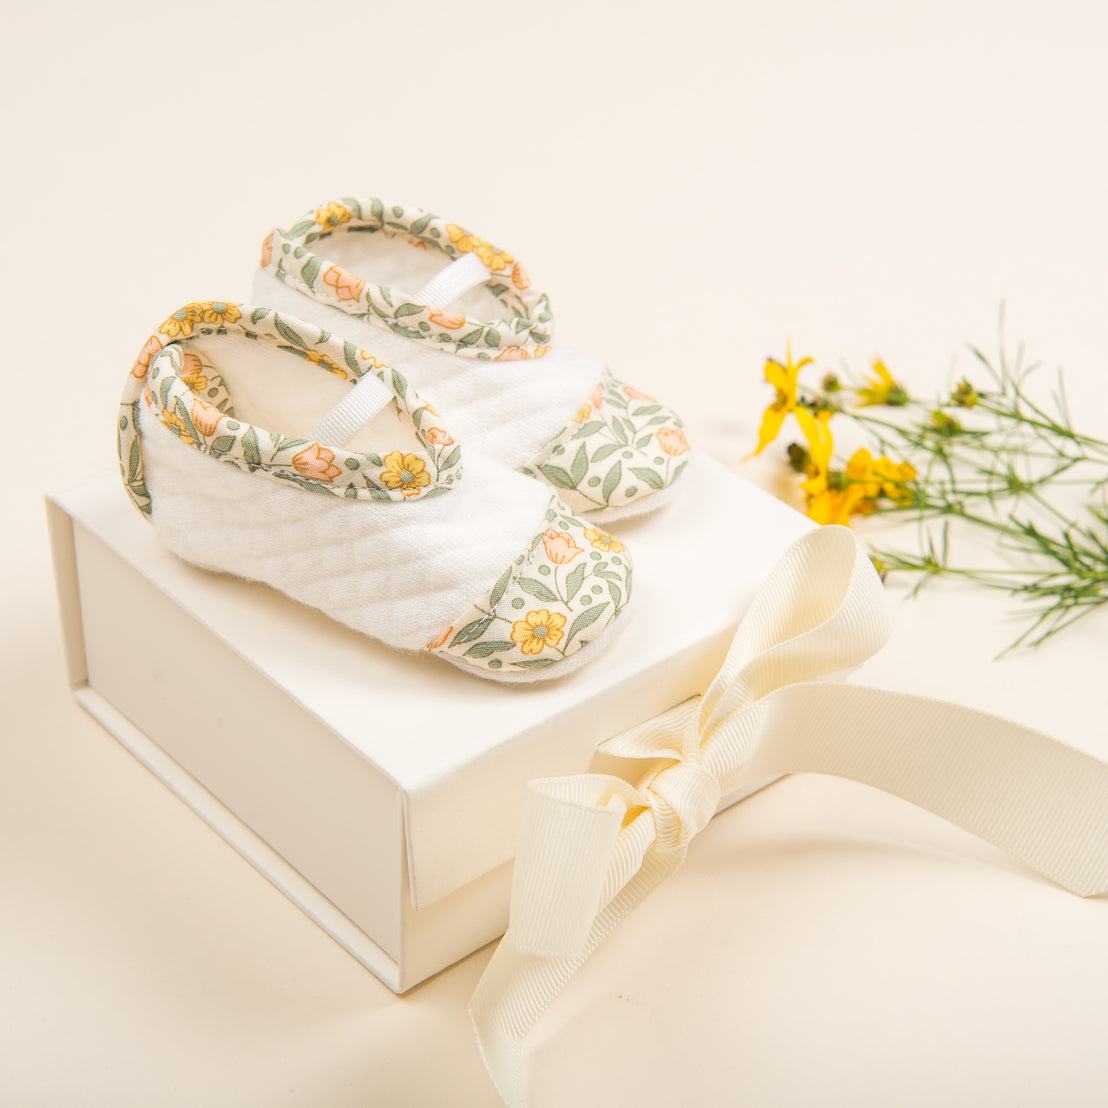 A pair of handcrafted, Petite Fleur Quilted Booties on a white box tied with a cream ribbon, placed beside yellow flowers on a light beige background.